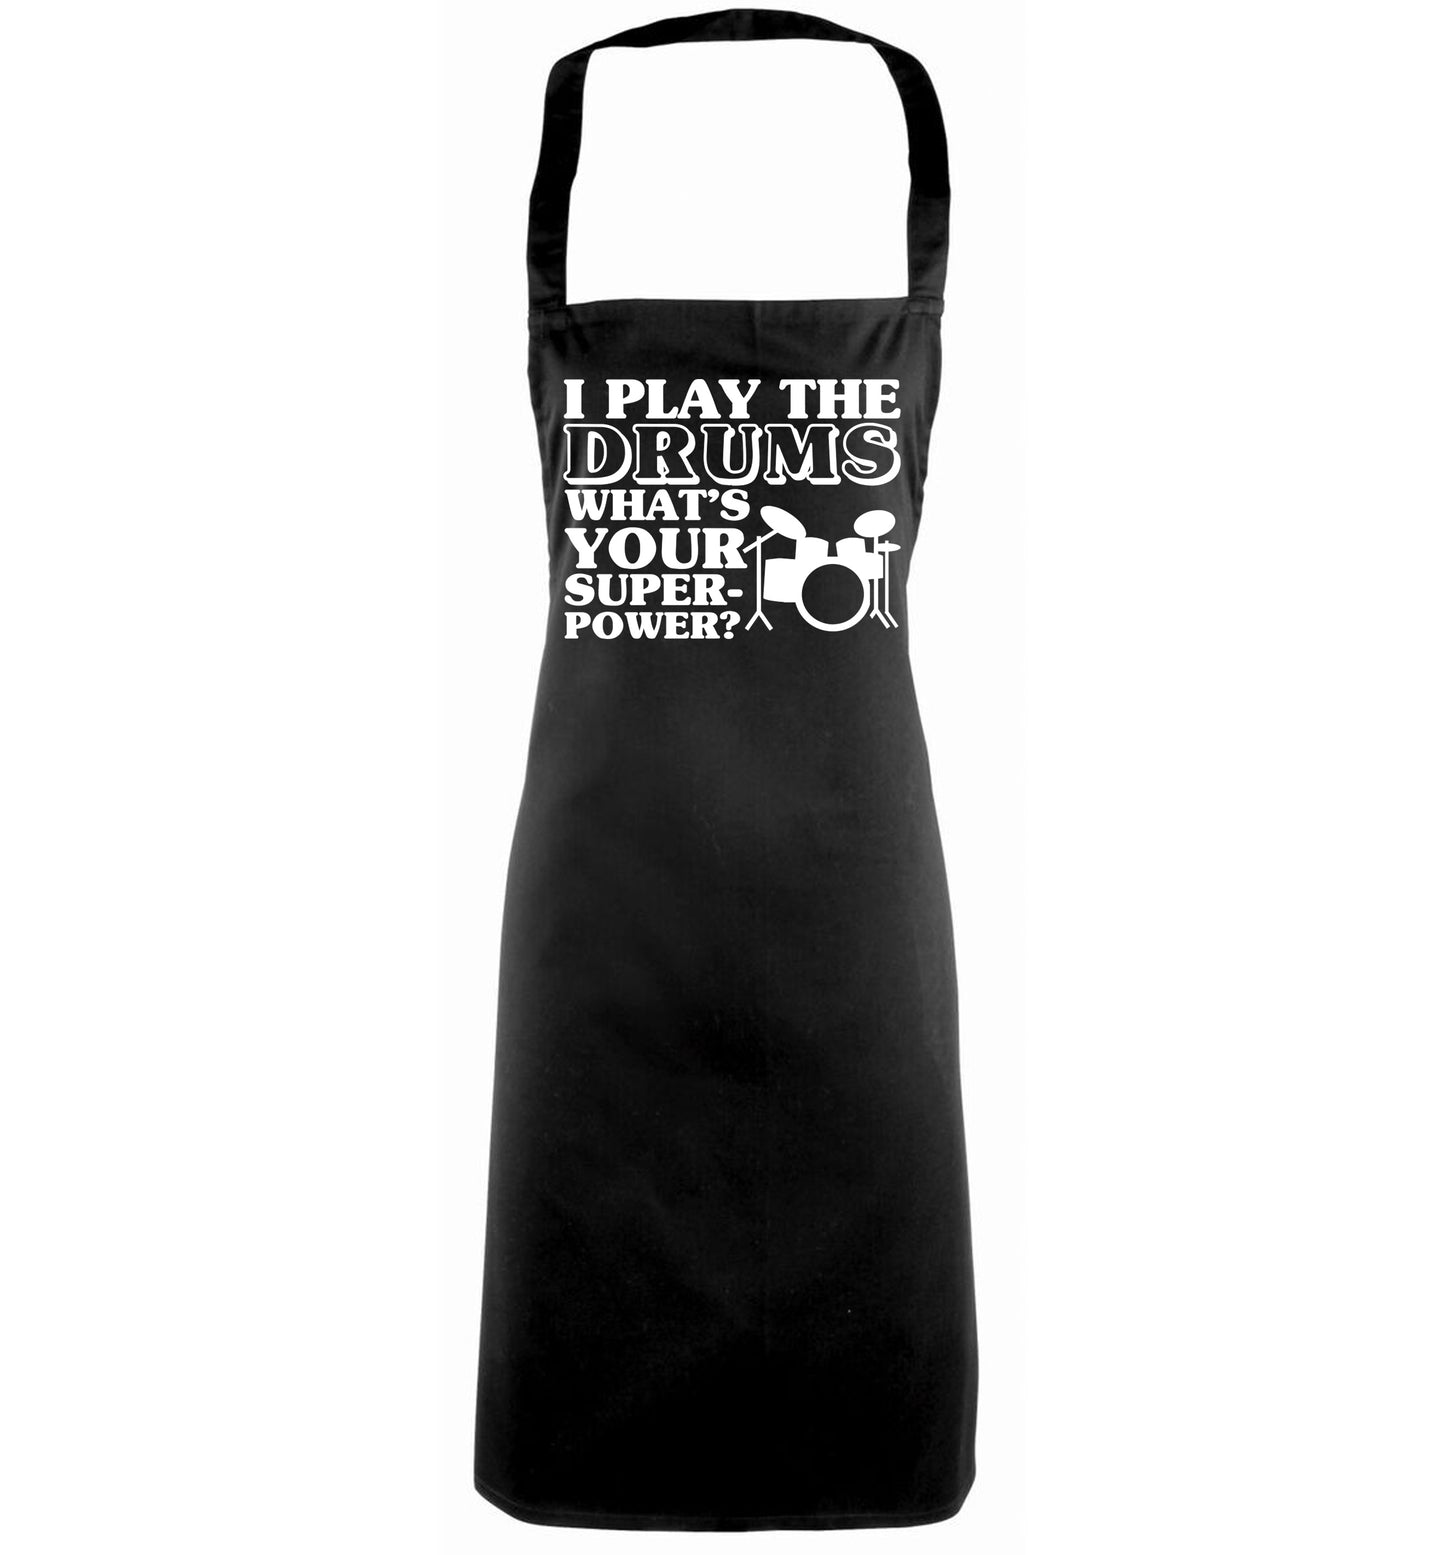 I play the drums what's your superpower? black apron